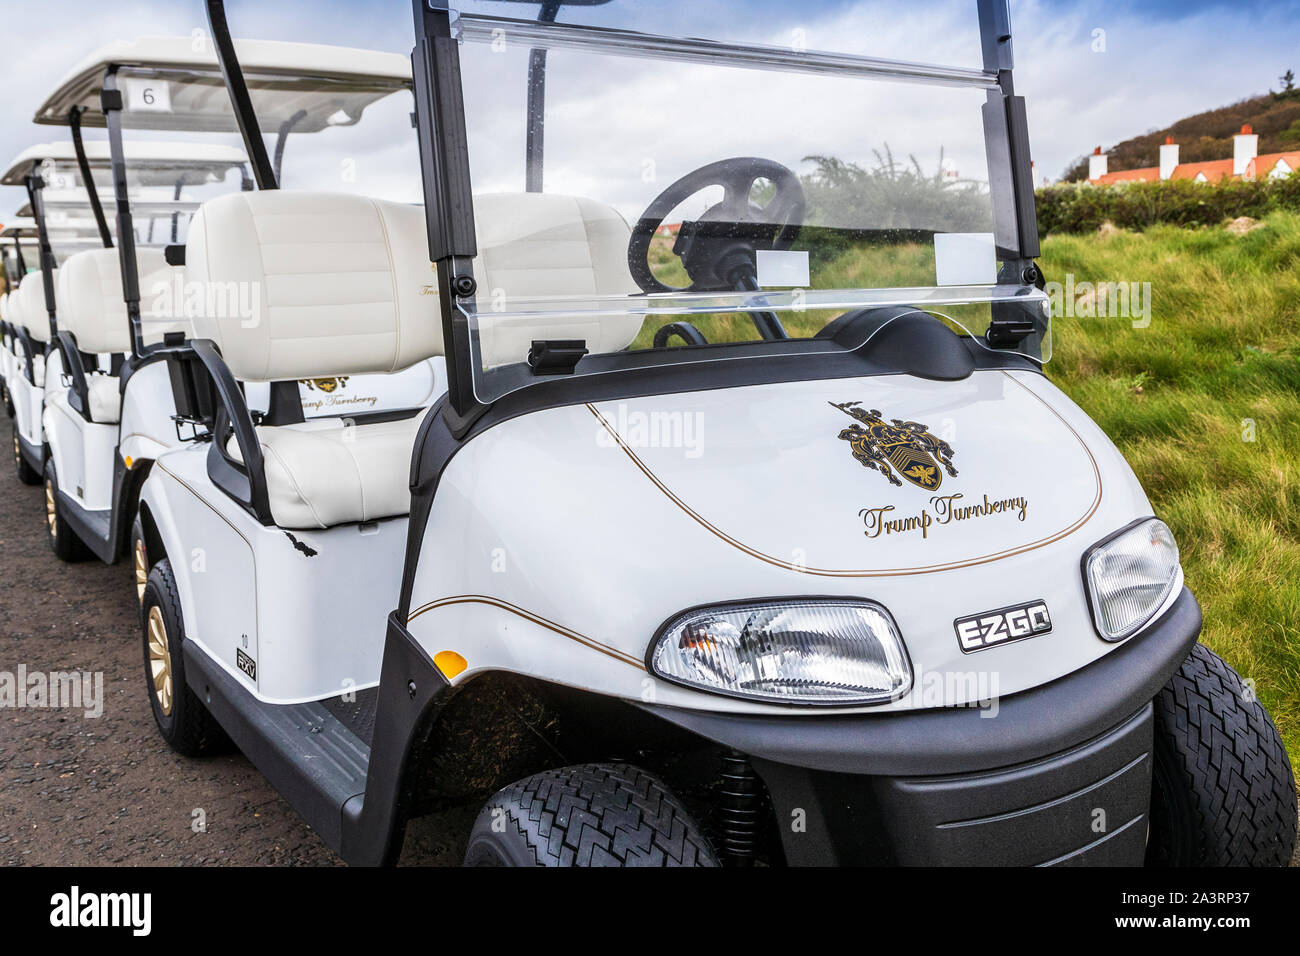 Line of golf buggies at Trump Turnberry Hotel and golf resort, Turnberry, Ayrshire, Scotland, UK Stock Photo